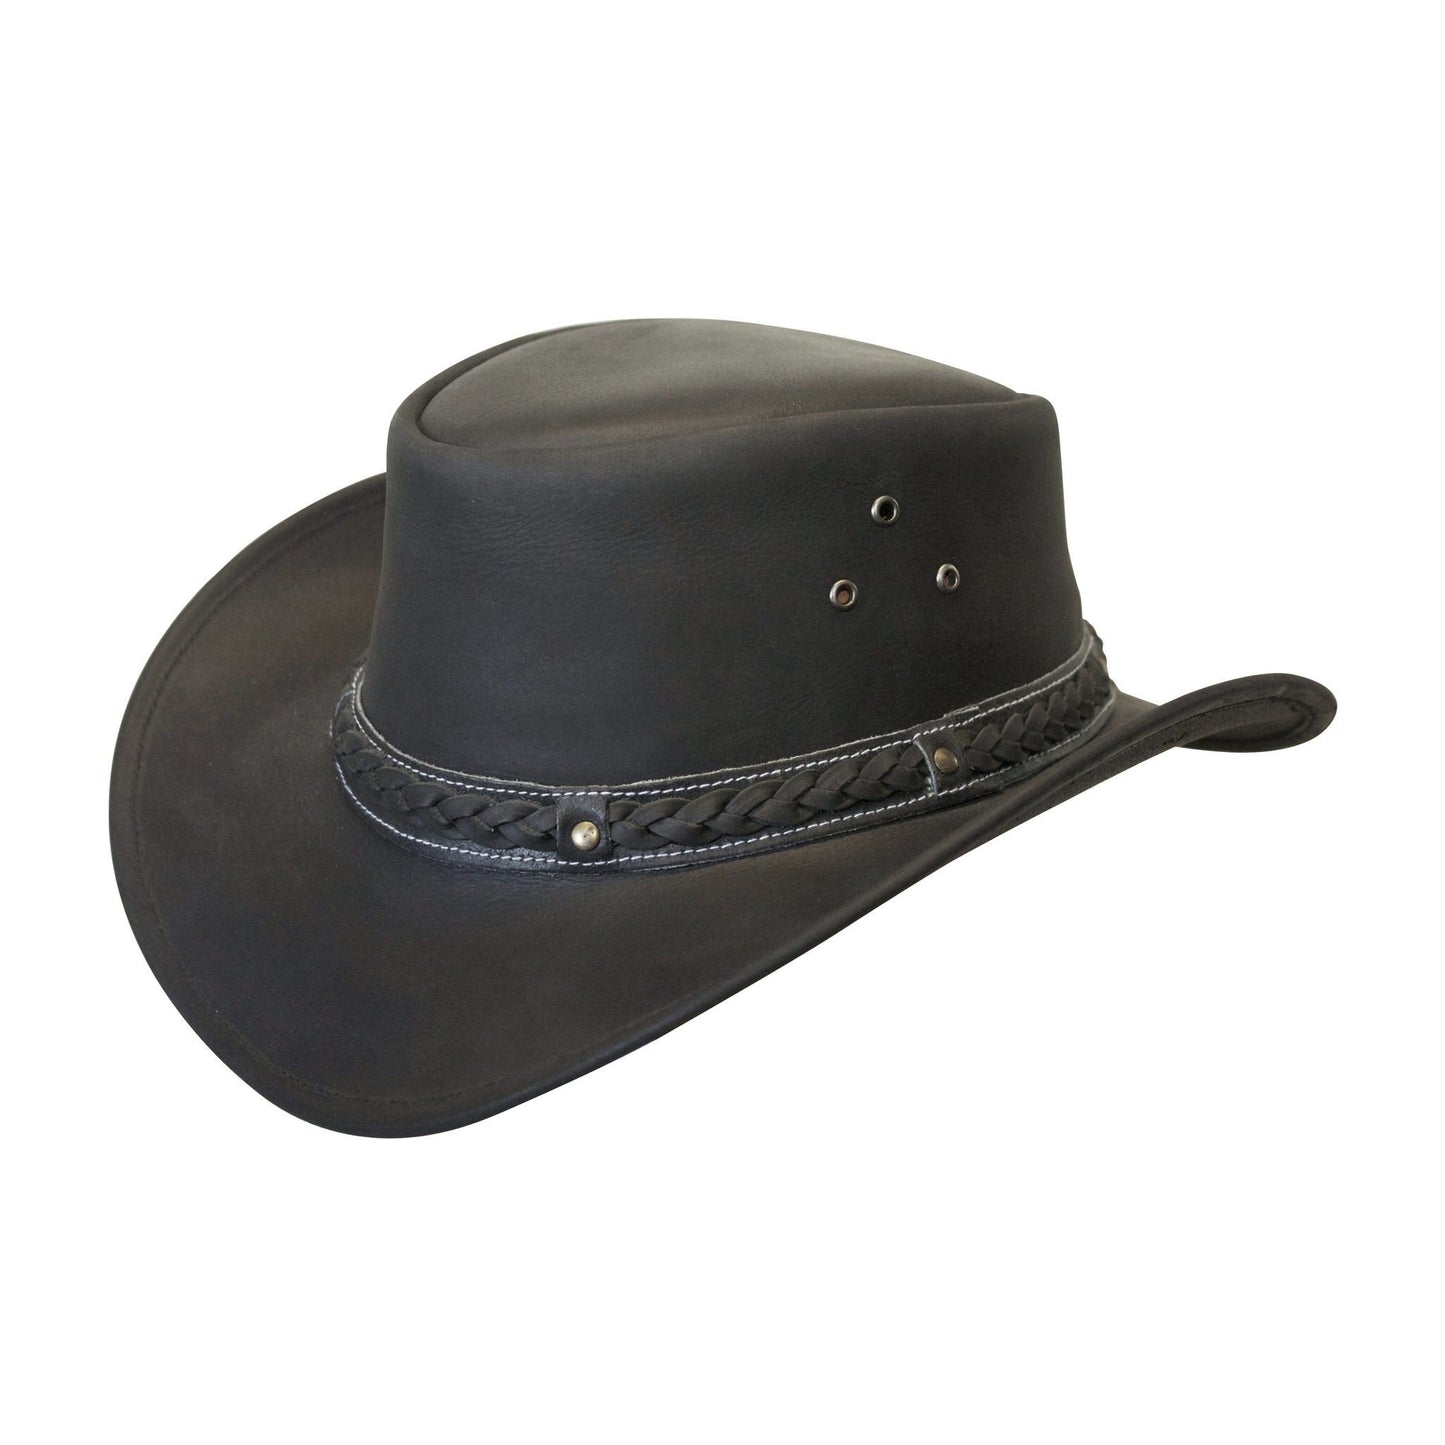 Outback leather hat in color Black with three eyelets for ventilation and sewn on braided hat band for a unique look